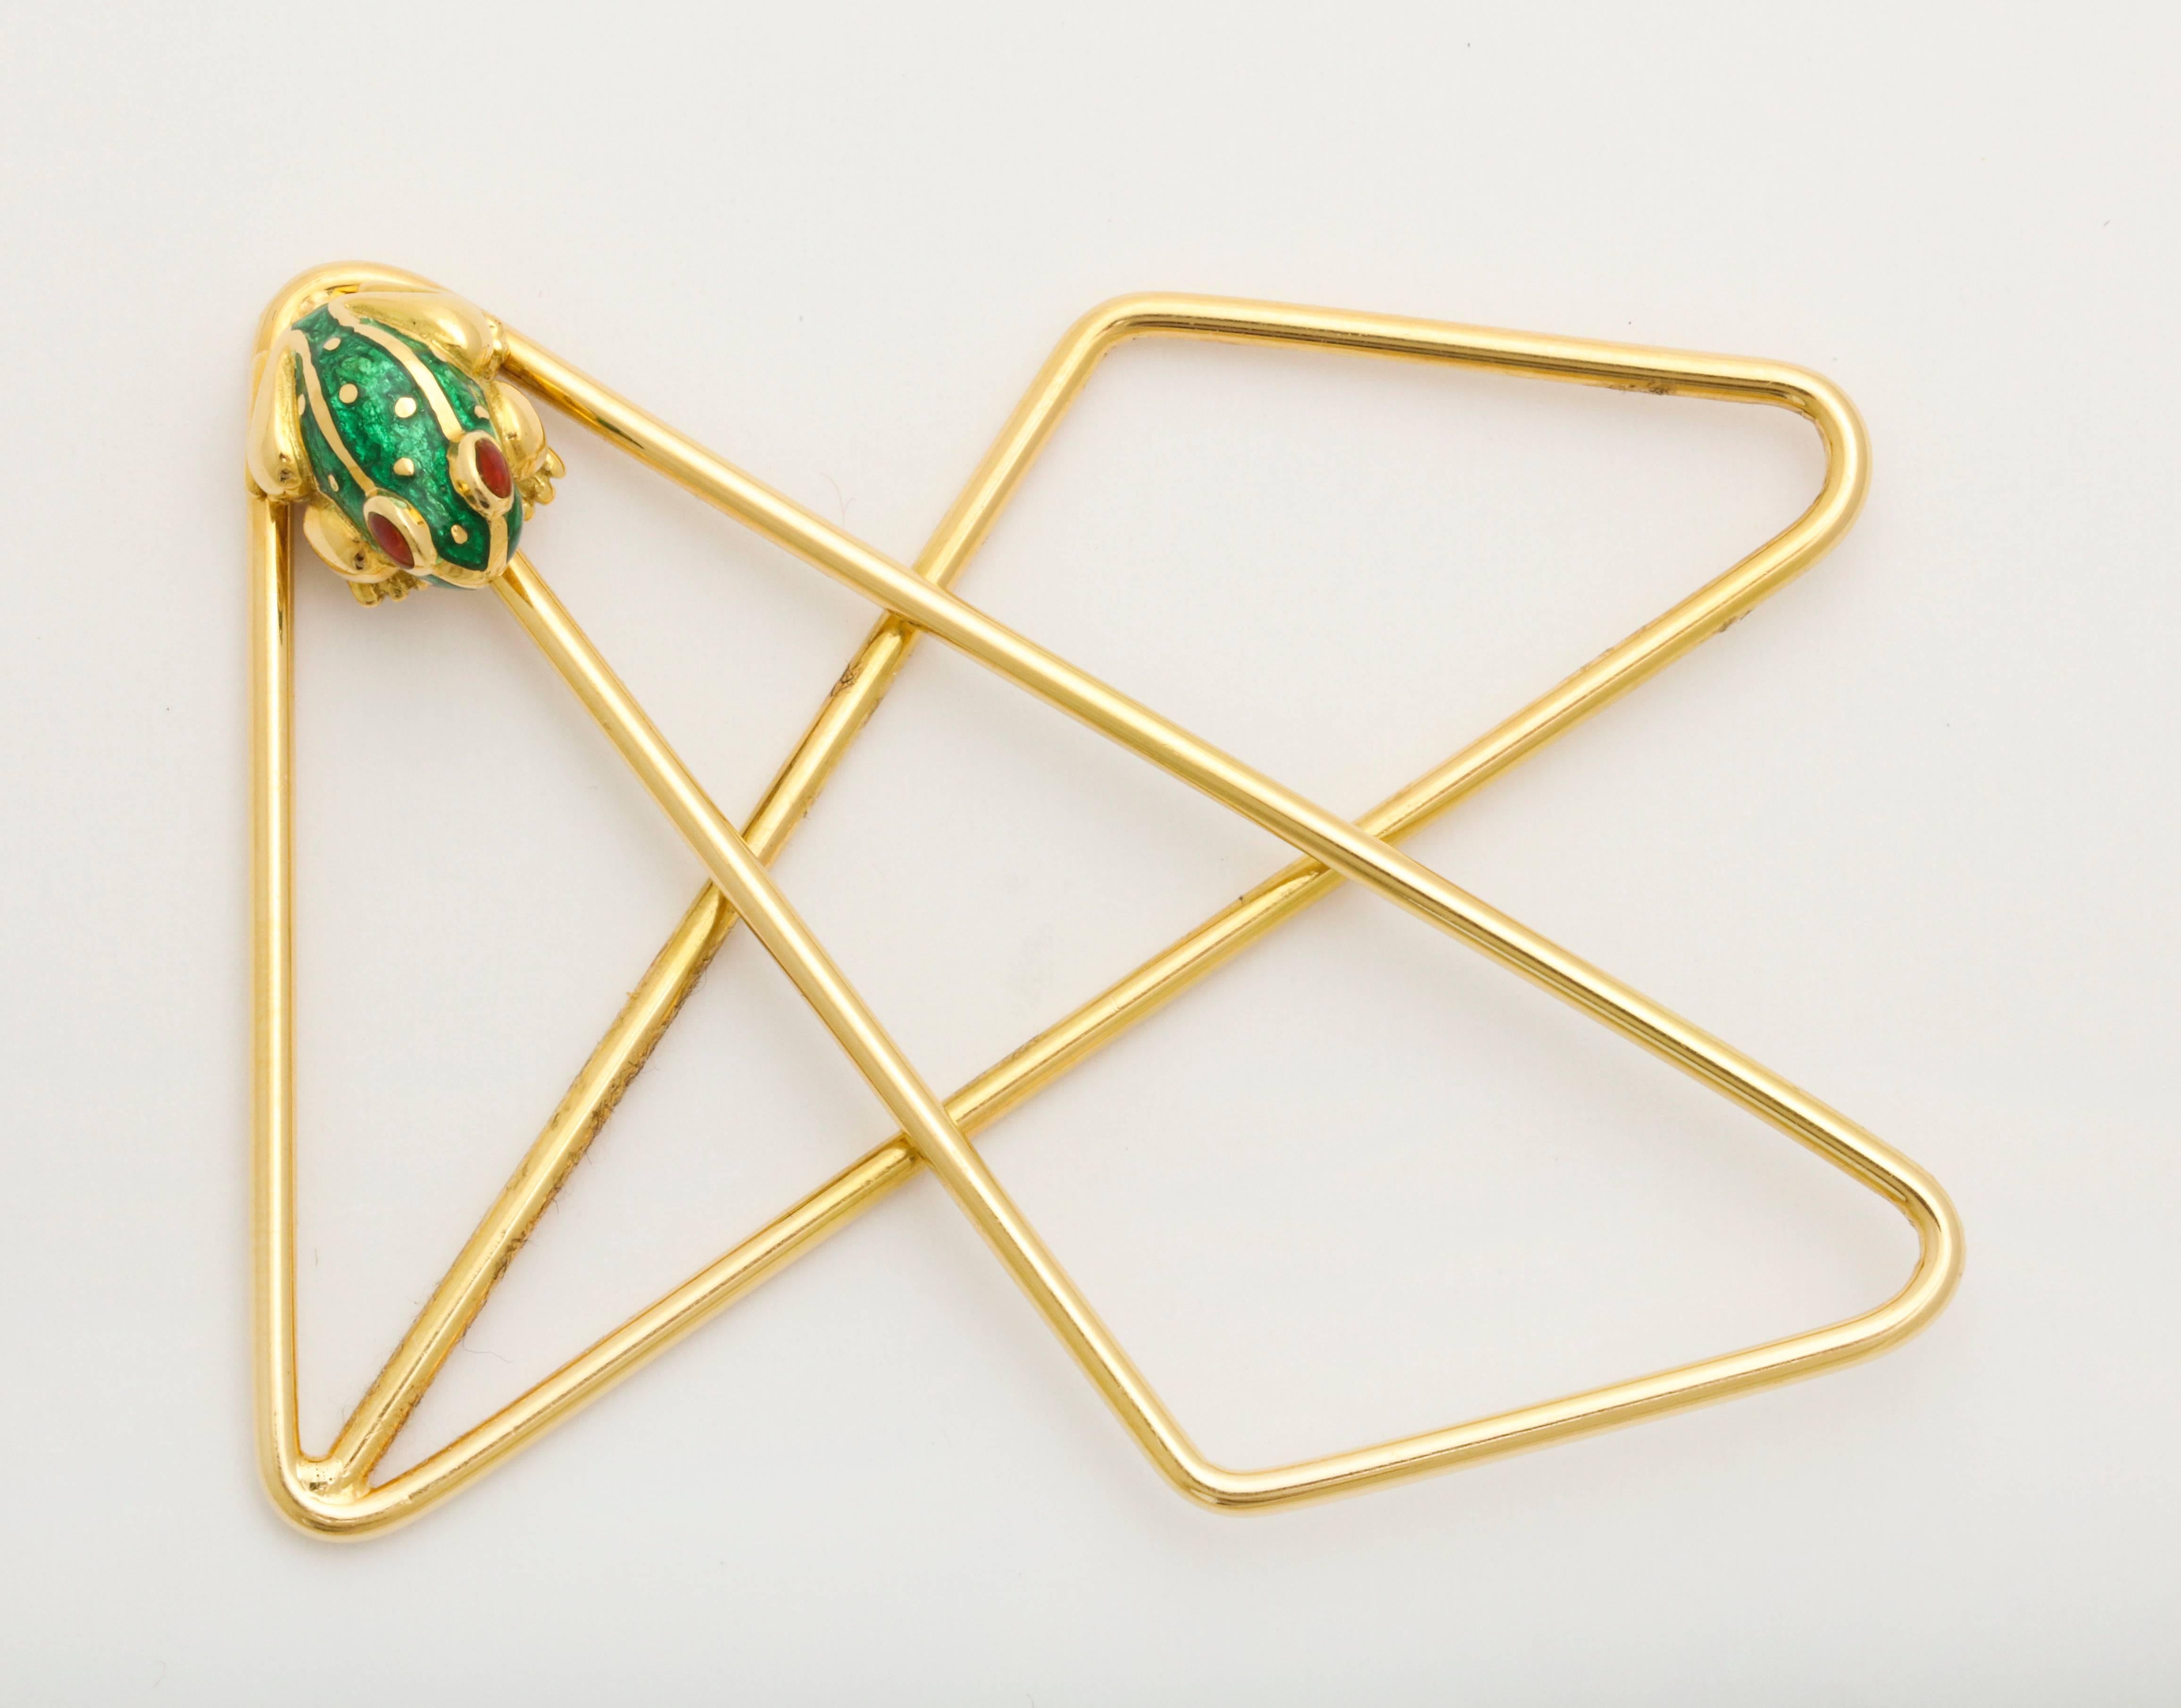 David Webb's iconic green and red enamel frog, uniquely mounted on an 18kt gold money clip.  Rare and whimsical, David Webb never ceases to amaze.

For three generations the Kanners family has been known as purveyors of fine and unique jewels.  
